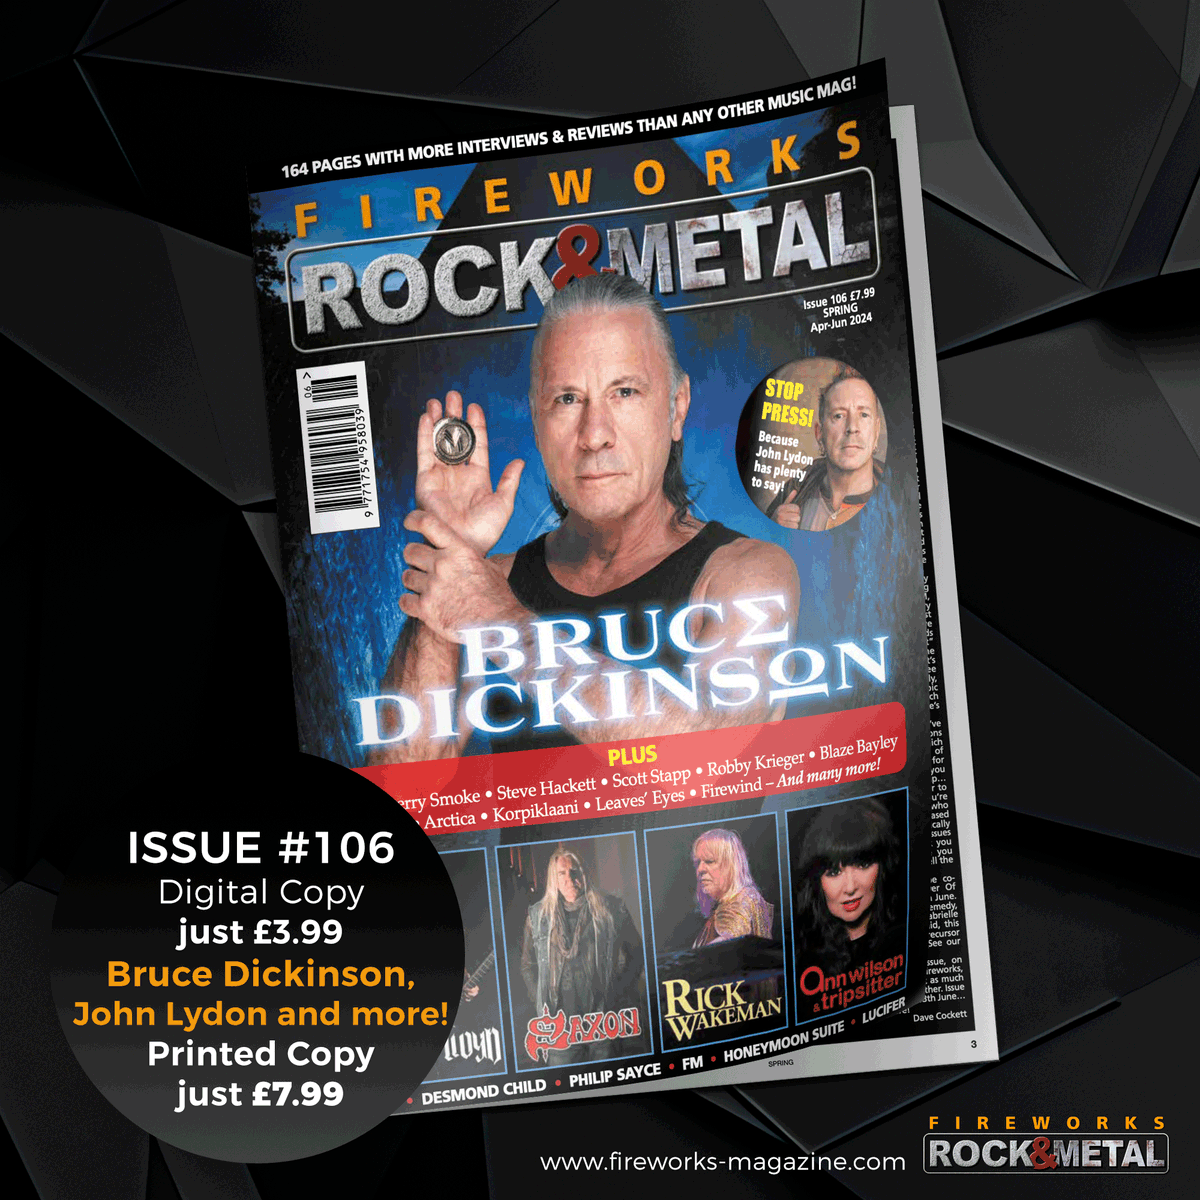 𝗜𝗦𝗦𝗨𝗘 #𝟭𝟬𝟲 - 164 pages full of reviews, interviews and features. Featuring stars from Blues, Rock, Metal, and Progressive! Come and give us a try. -- BUY Issue #106 from fireworks-magazine.com 𝙐𝙆 𝙎𝙪𝙗𝙨𝙘𝙧𝙞𝙥𝙩𝙞𝙤𝙣𝙨 𝙣𝙤𝙬 𝙟𝙪𝙨𝙩 £32.